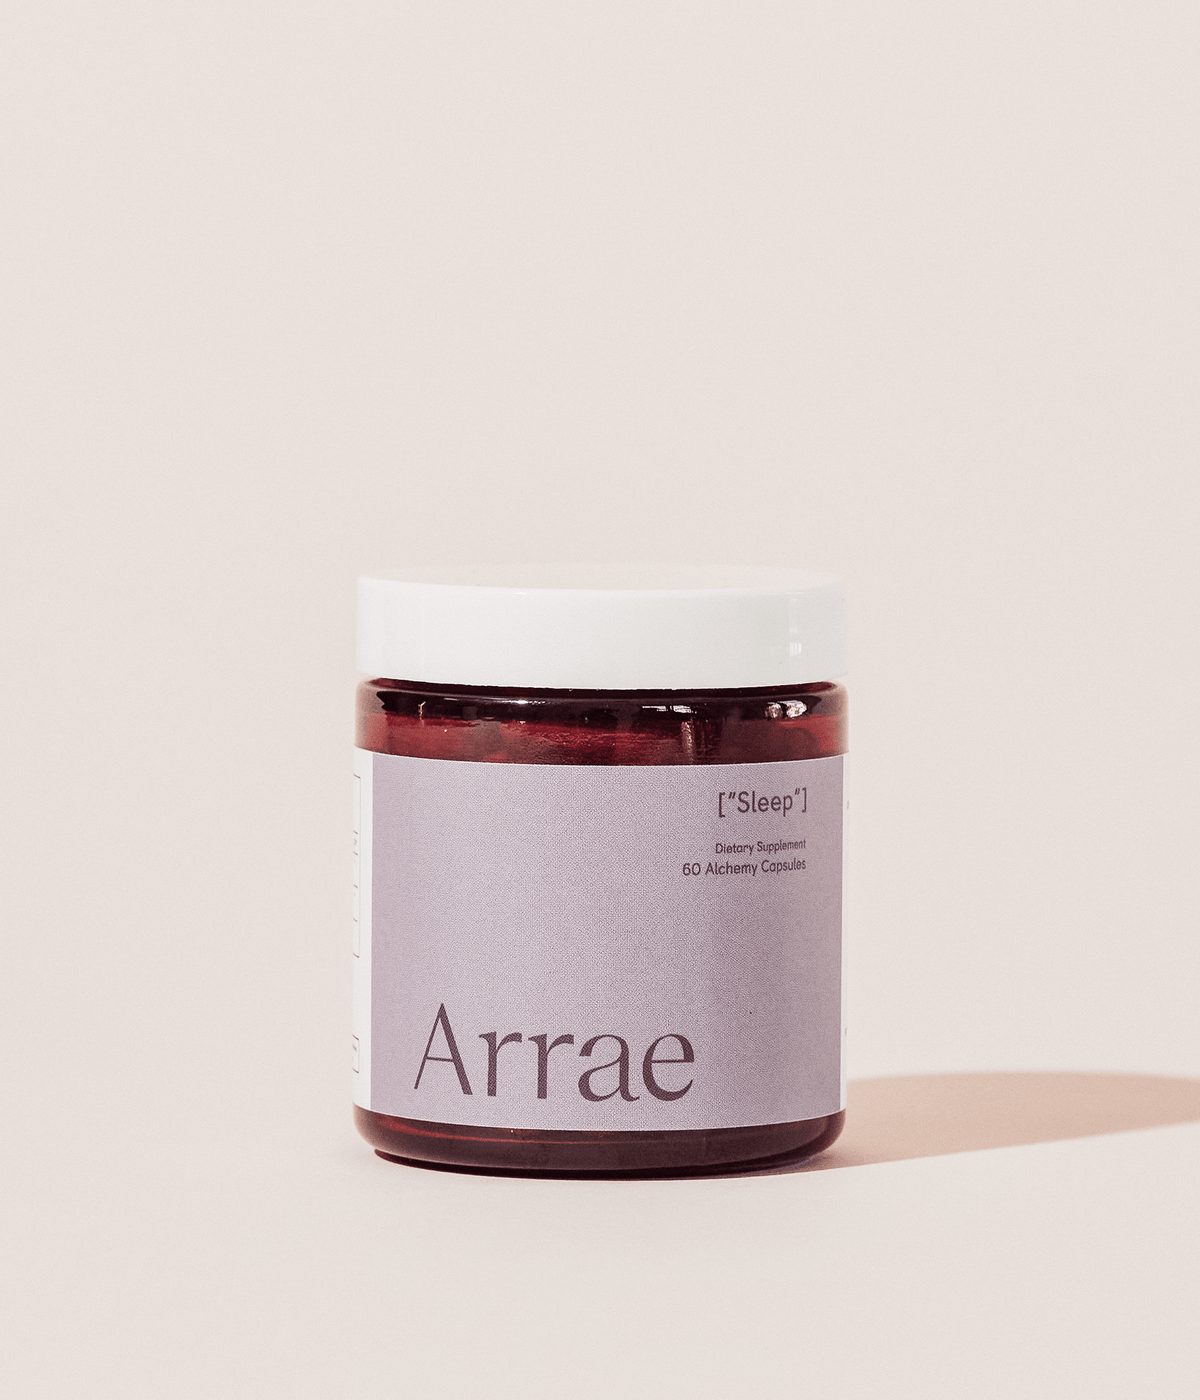 Arrae Sleep Supplement - A bottle of 60 capsules featuring a blend of natural ingredients, designed to promote restful sleep and relaxation without melatonin.